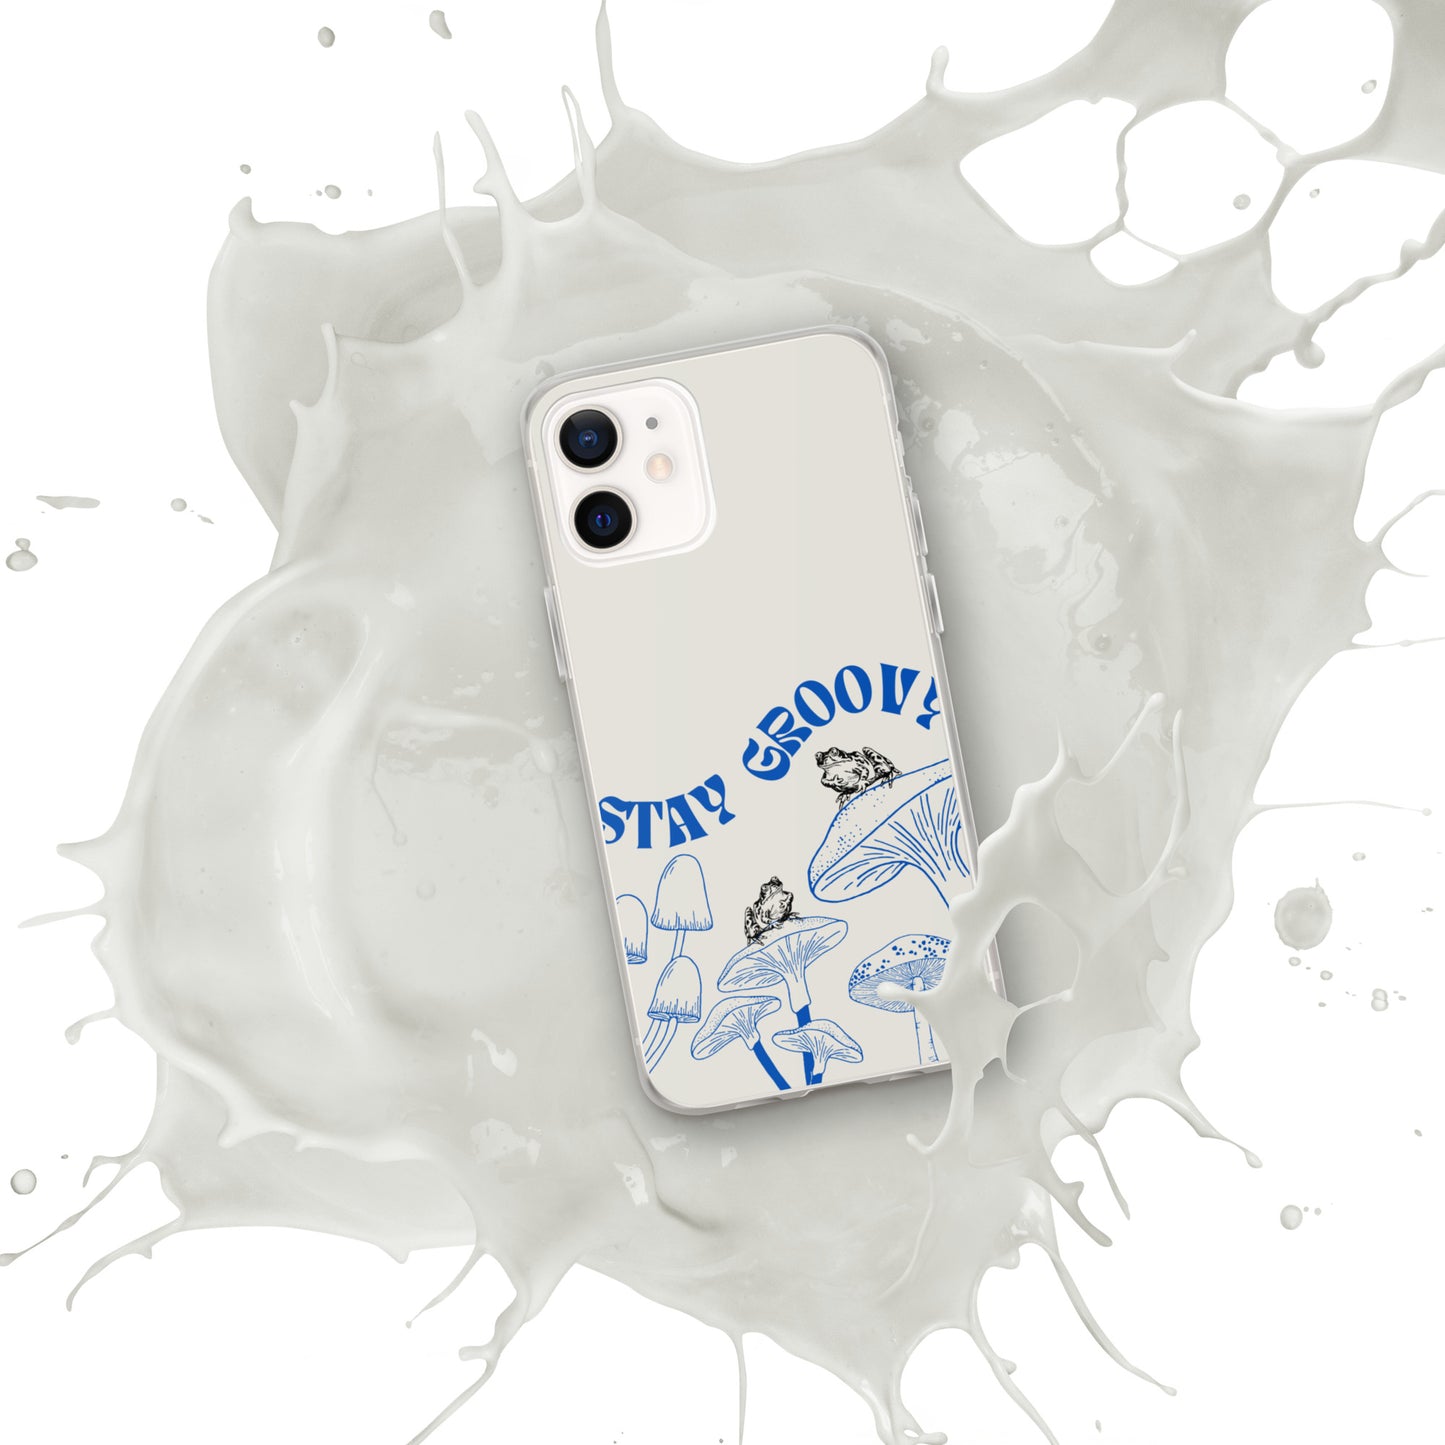 STAY GROOVY iPhone Case